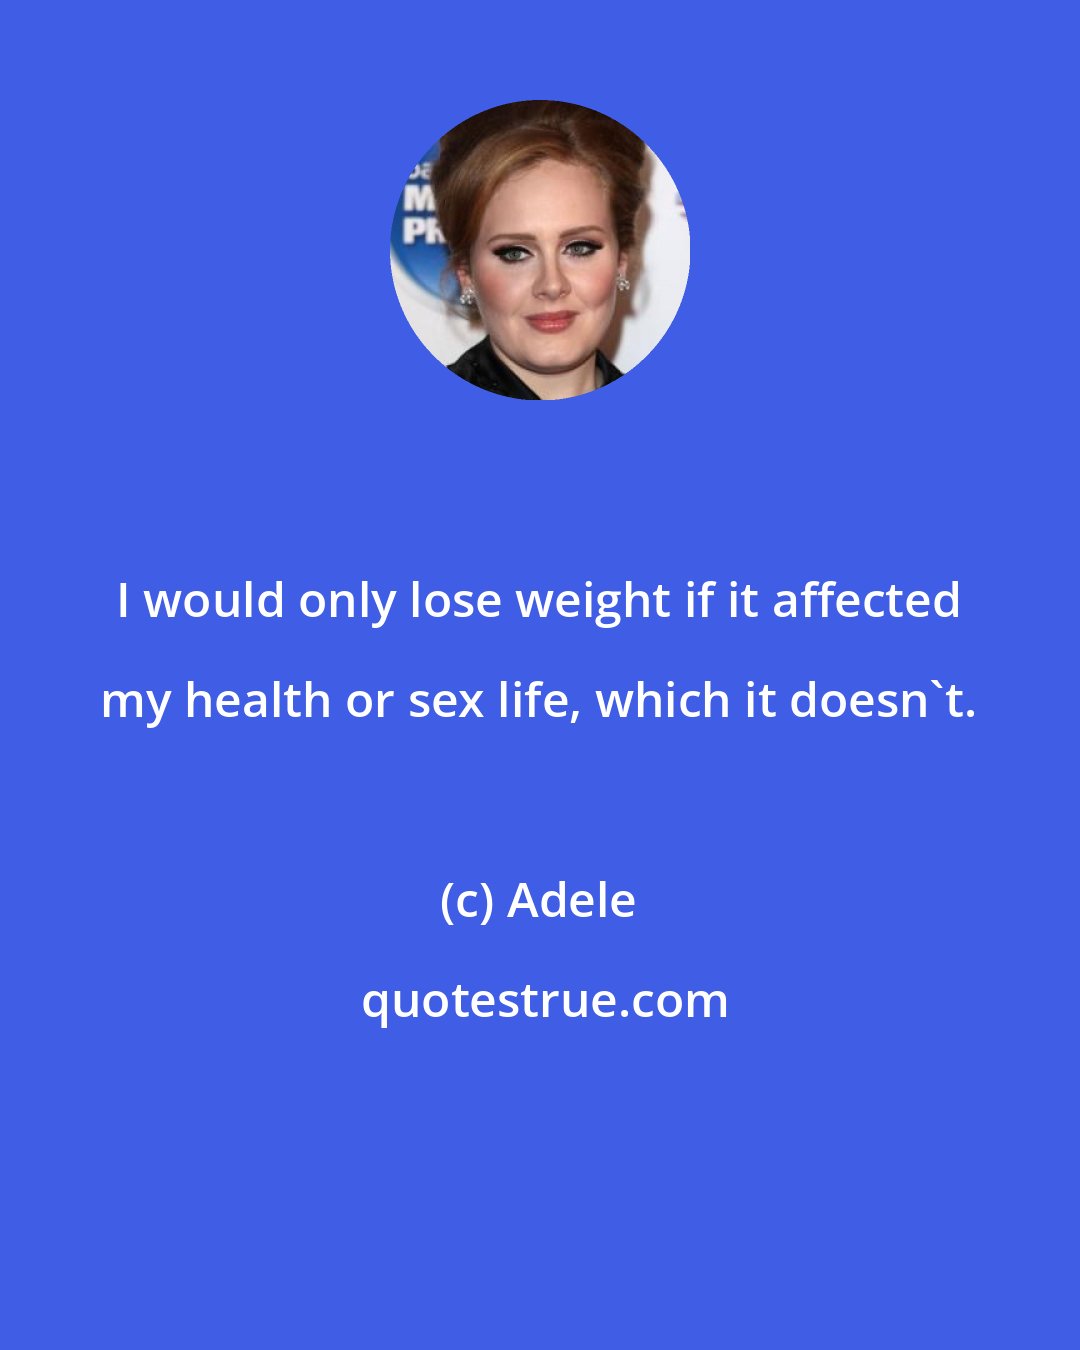 Adele: I would only lose weight if it affected my health or sex life, which it doesn't.